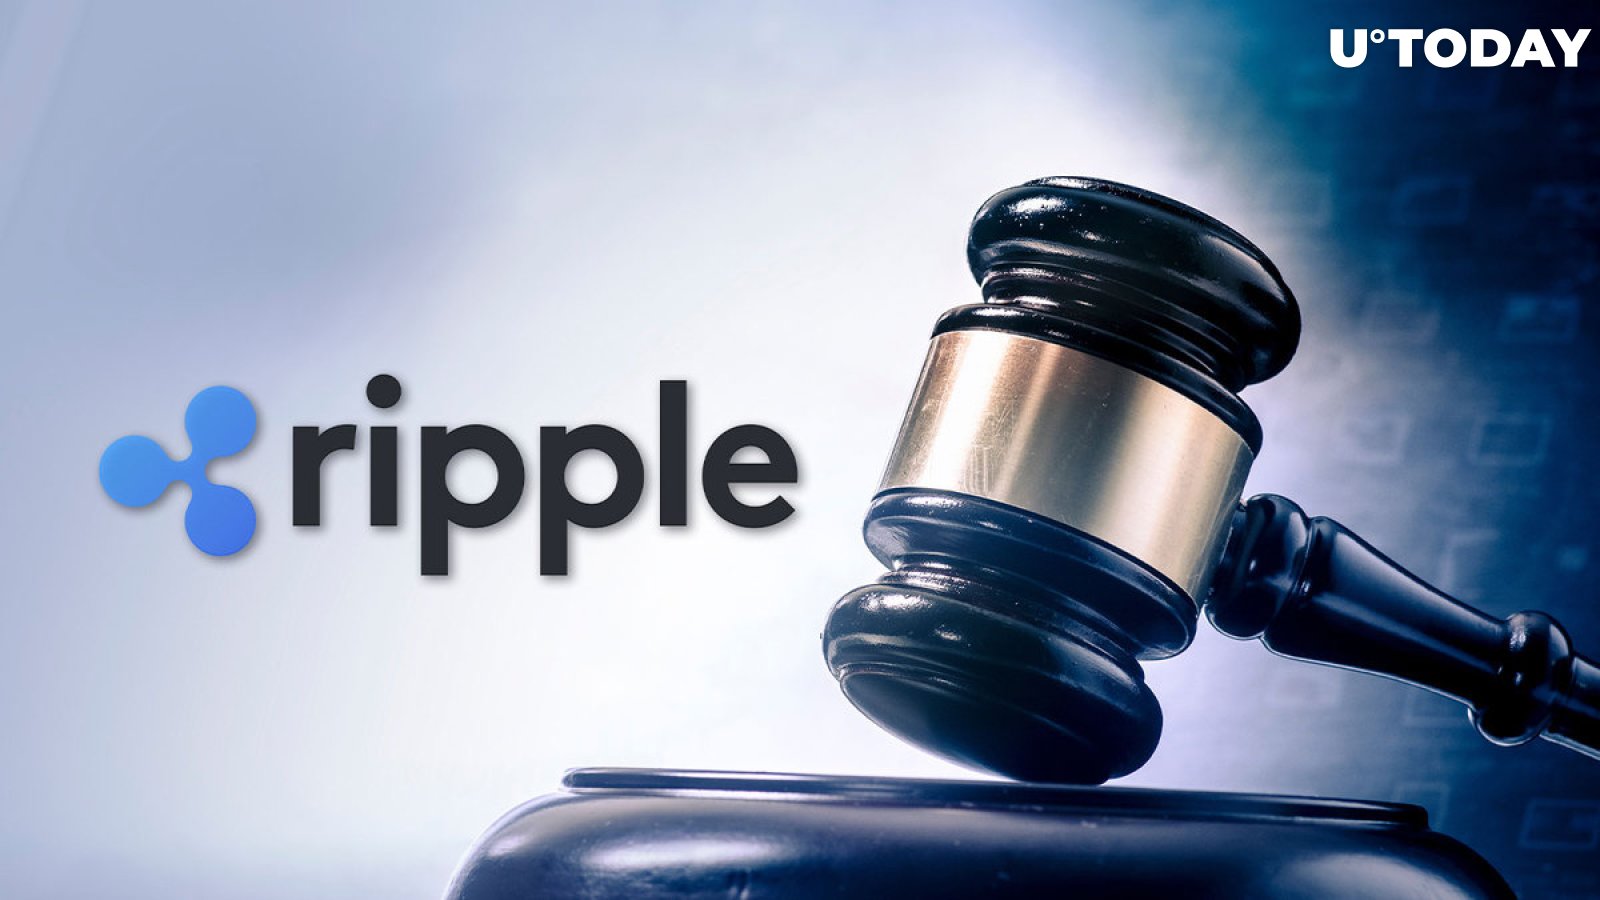 Ripple Lawsuit: VC Firm Makes Strong Case Why XRP Should Not Be Considered Security